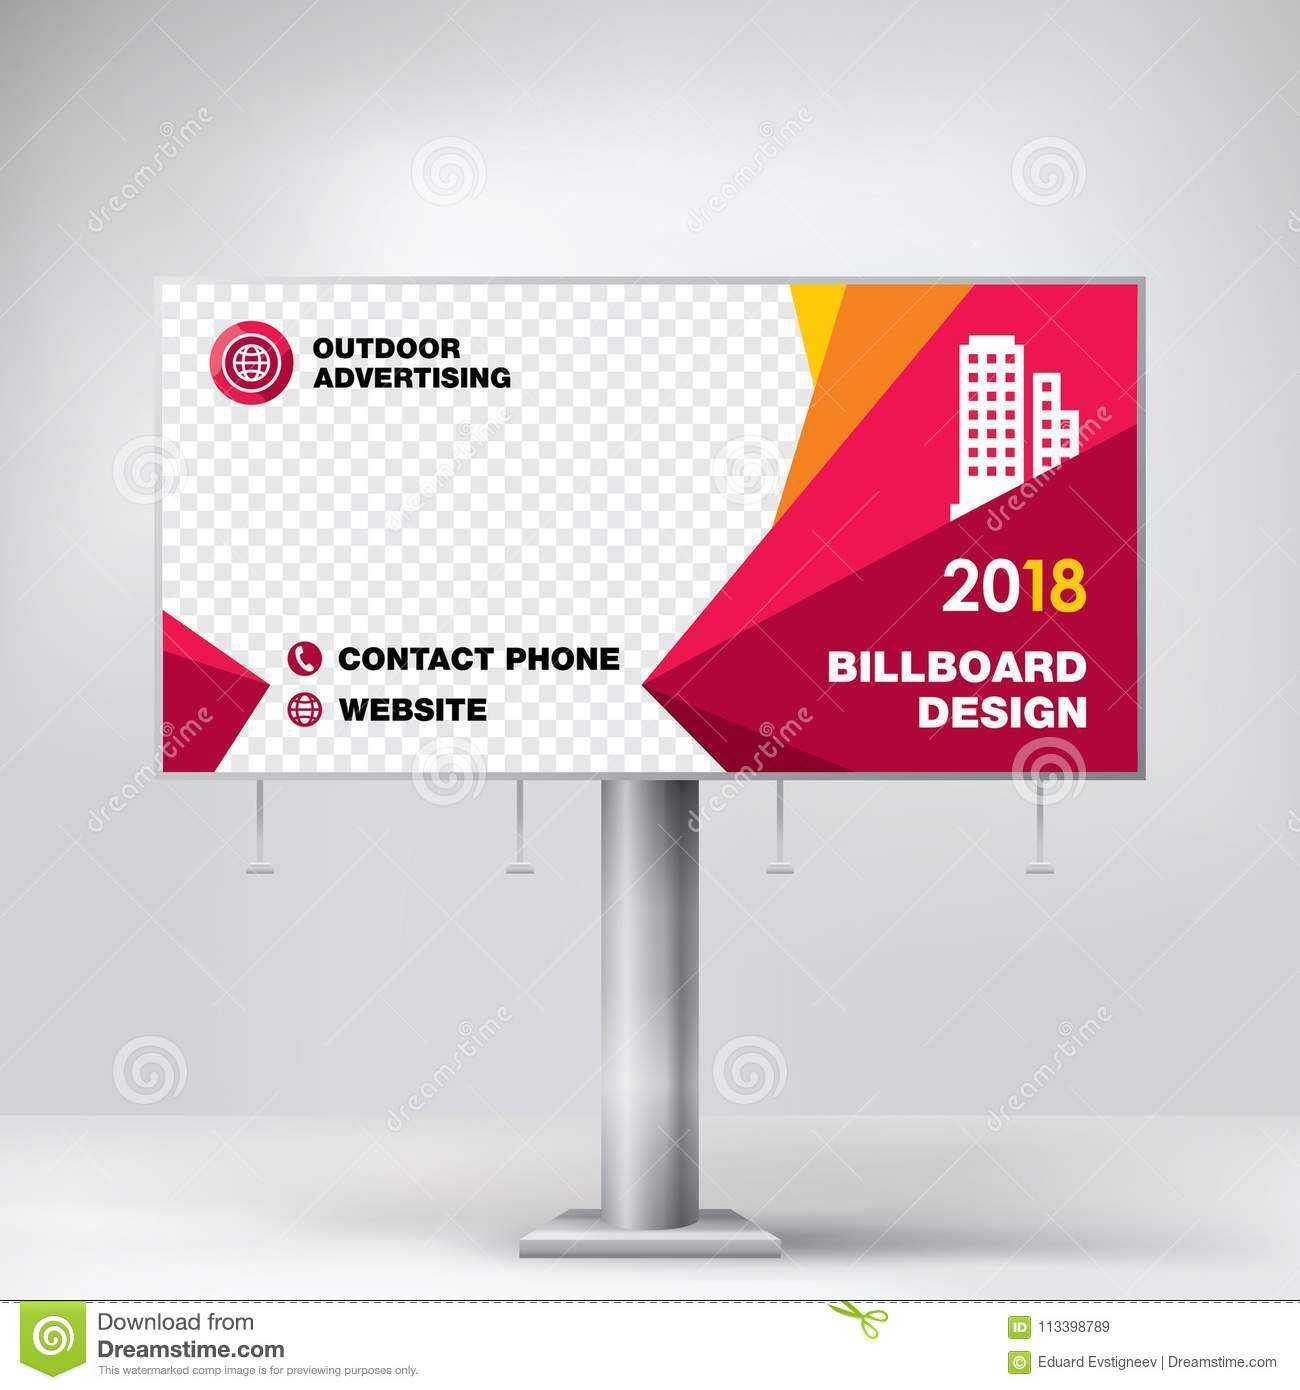 Billboard Design, Template For Outdoor Advertising, Modern Pertaining To Outdoor Banner Design Templates